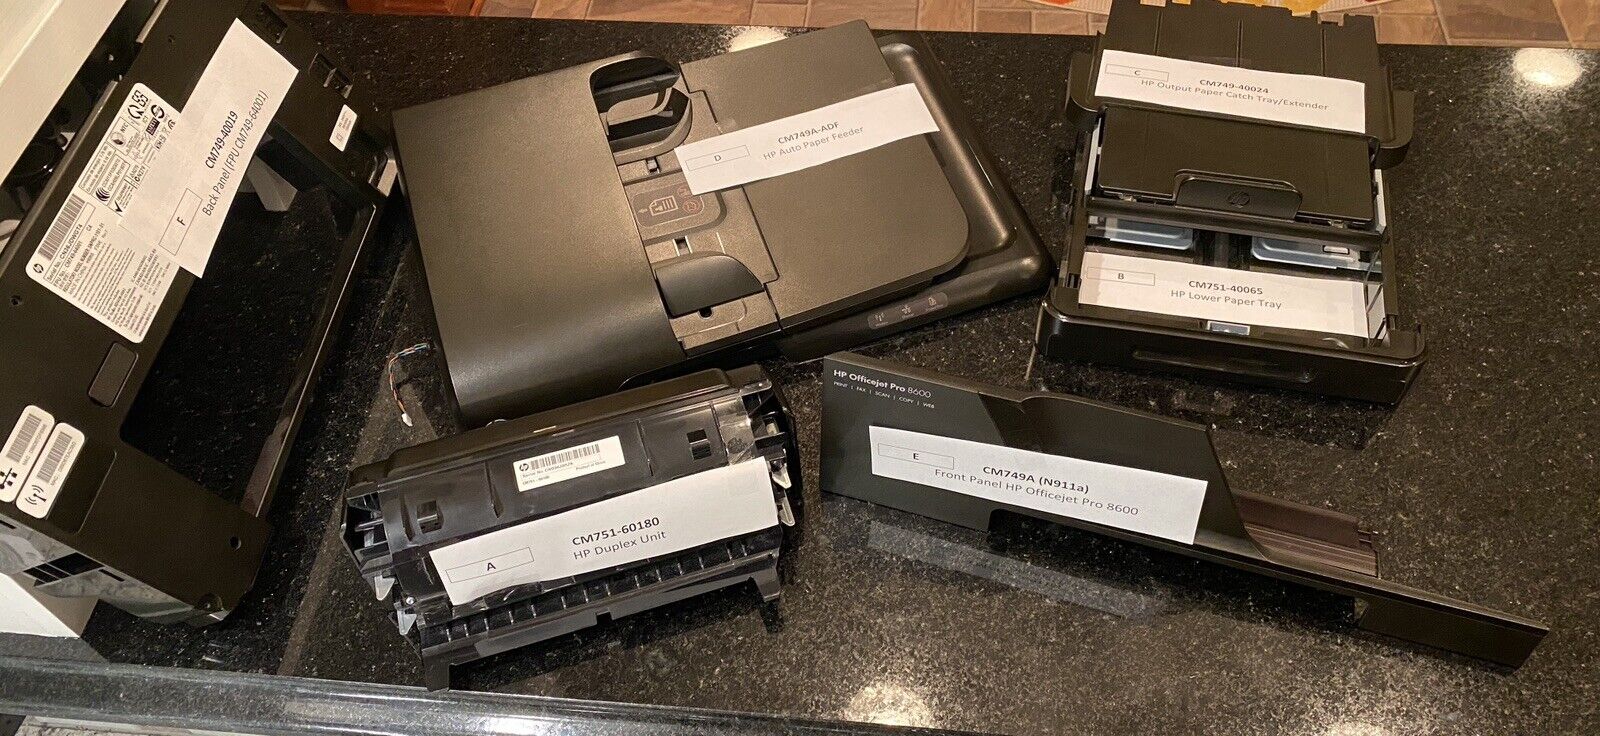 HP Officejet Pro 8600 - DISASSEMBLED - Selling 5 Parts - each priced separately